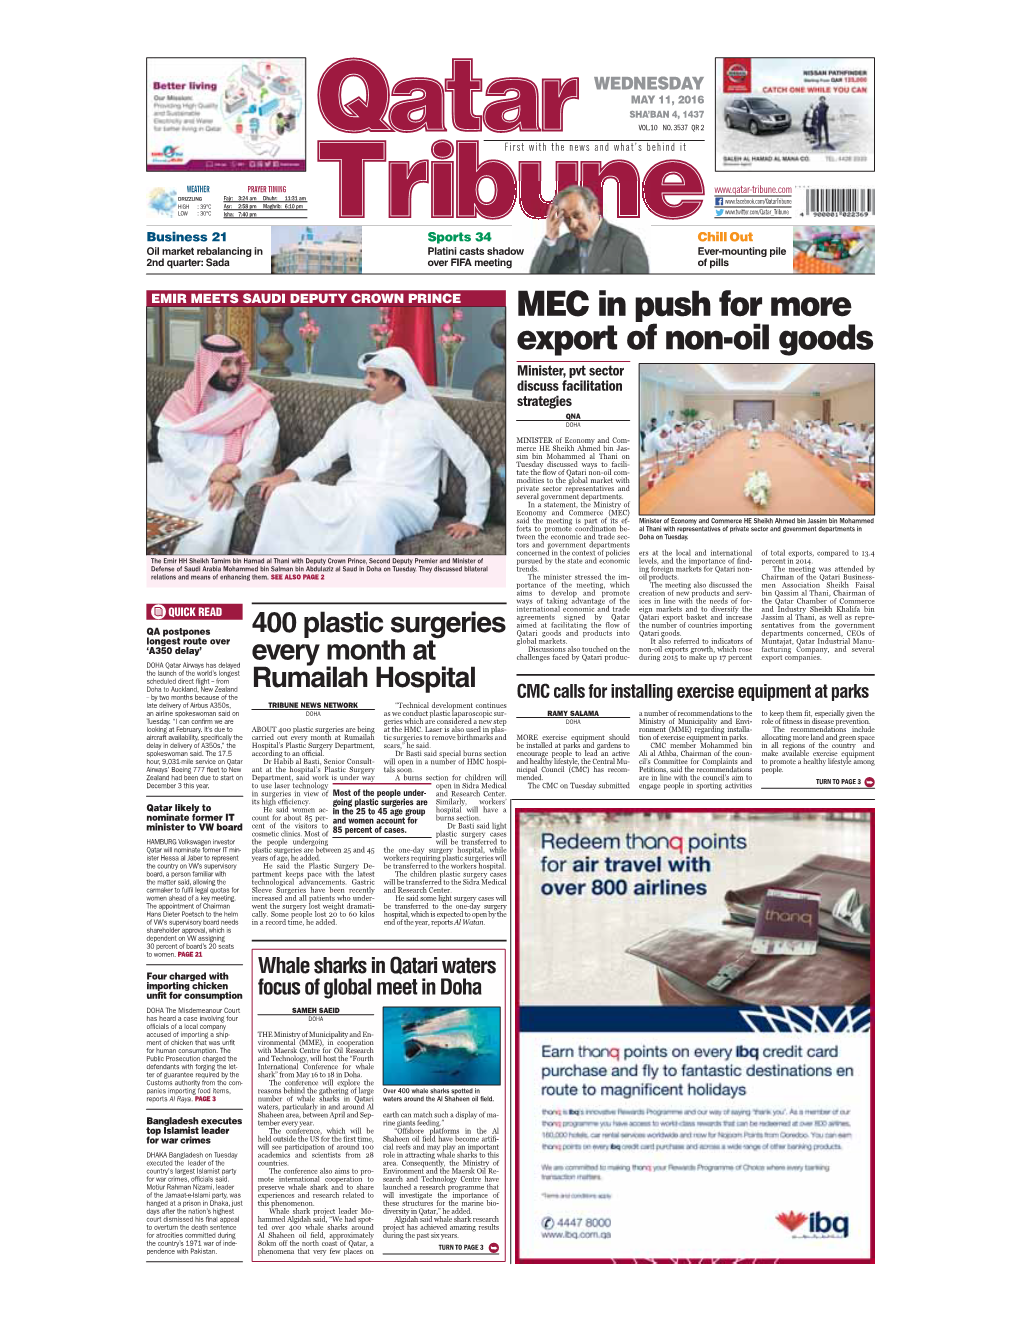 MEC in Push for More Export of Non-Oil Goods Minister, Pvt Sector Discuss Facilitation Strategies QNA DOHA